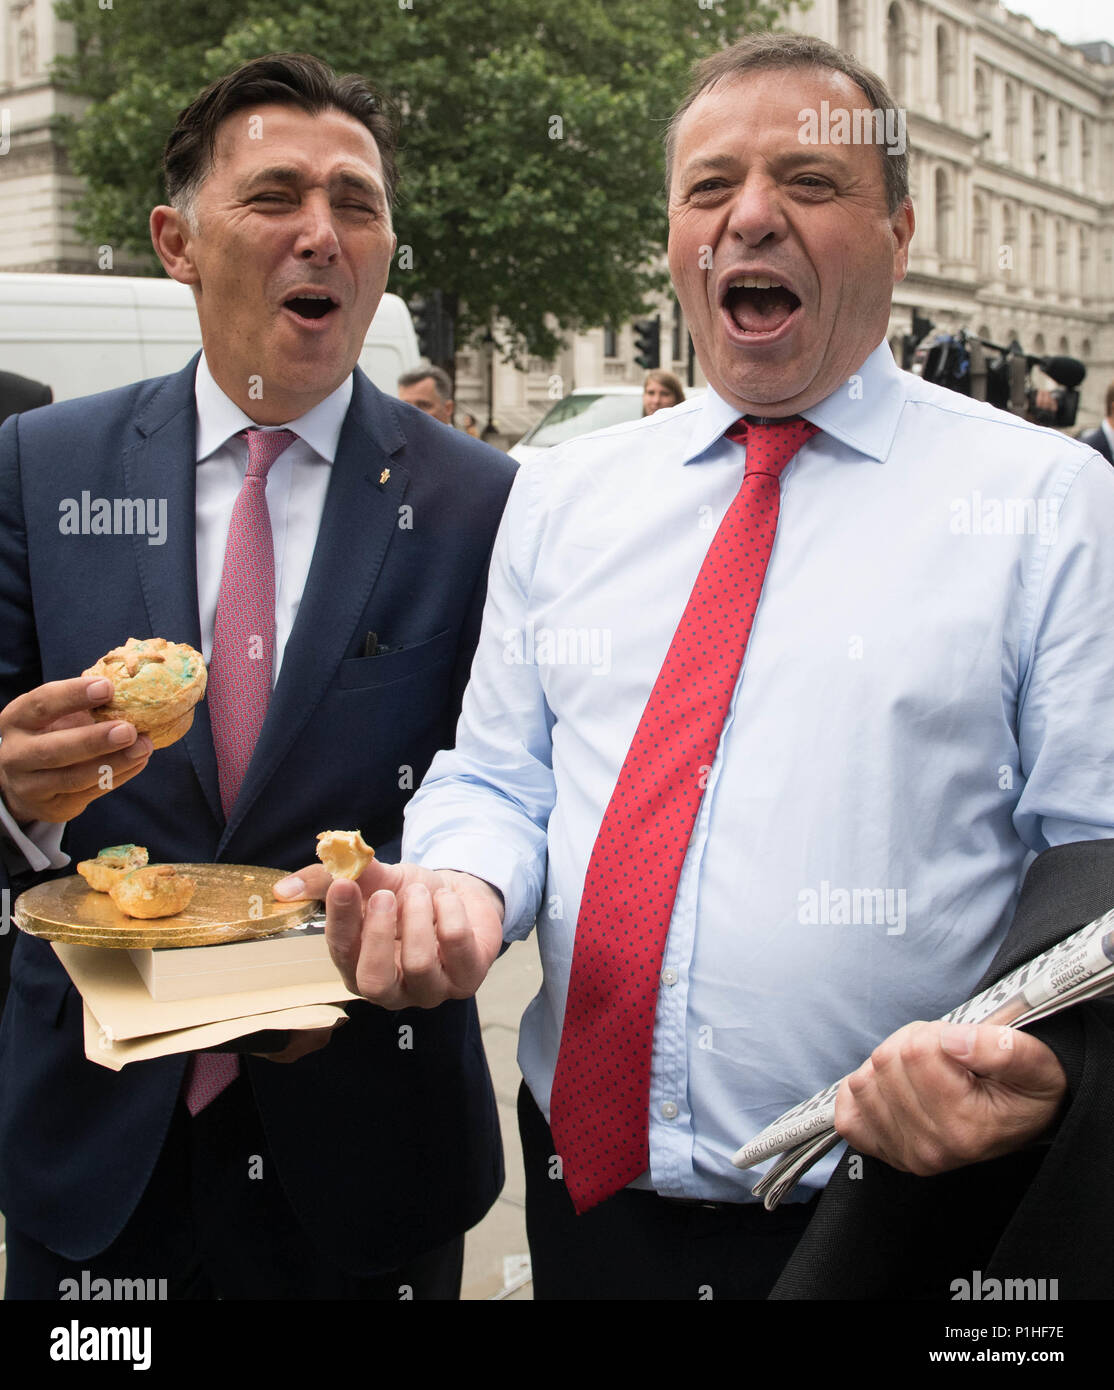 Leave.EU founder Arron Banks (right) arrives at Portcullis House in Westminster, London, with colleague Andy Wigmore. Mr Banks is due to give evidence to the Digital, Culture, Media and Sport Committee inquiry into fake news. Stock Photo